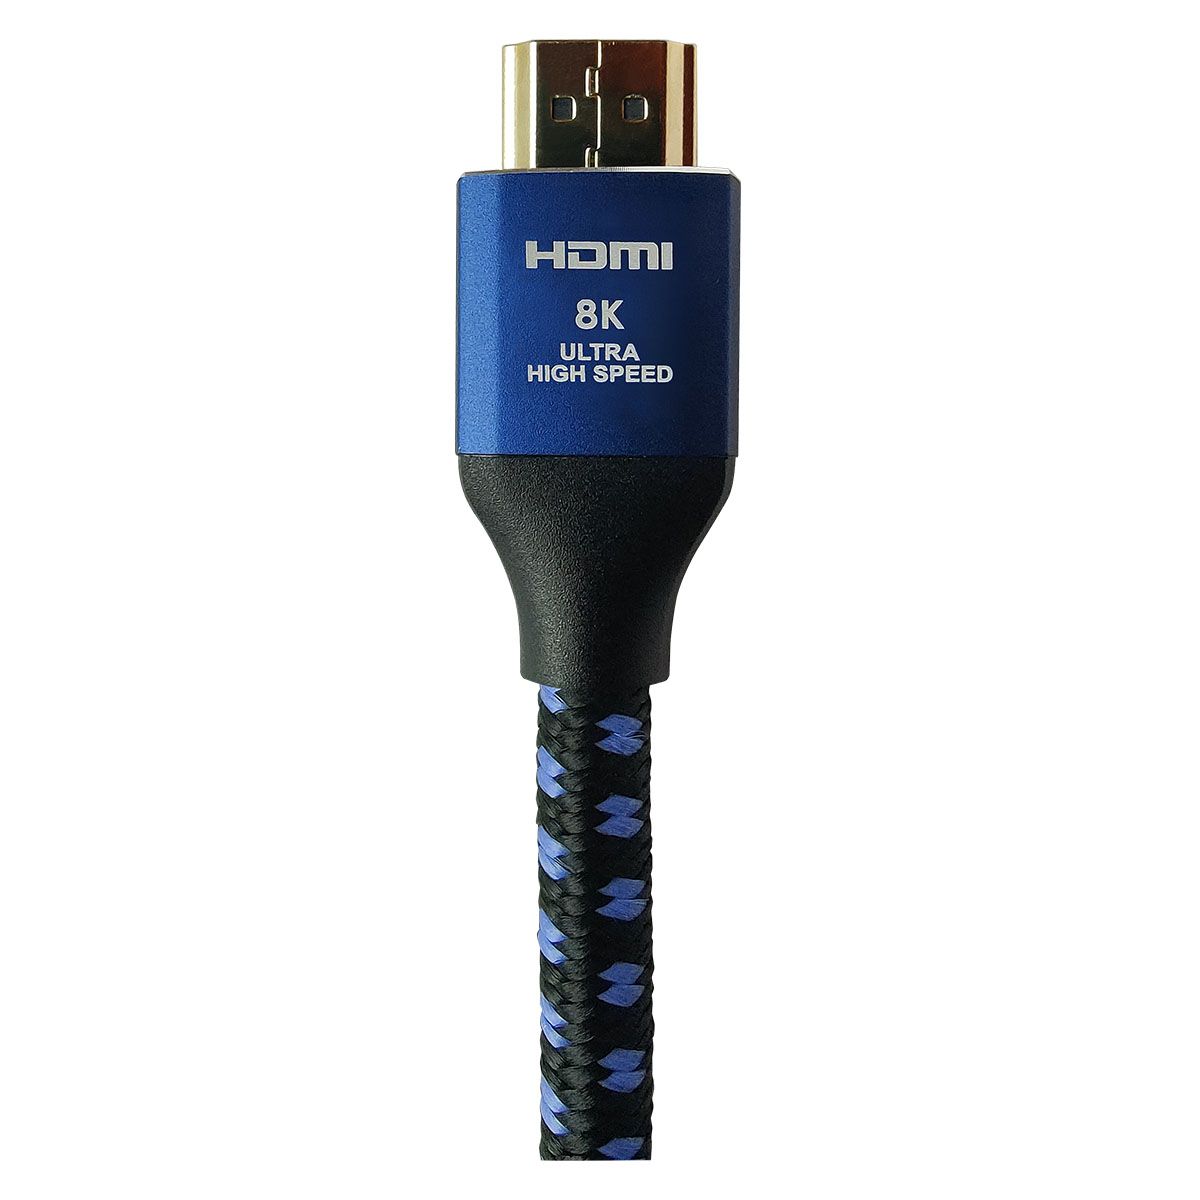 SVS SoundPath Ultra HDMI Cable - showing 8K certification